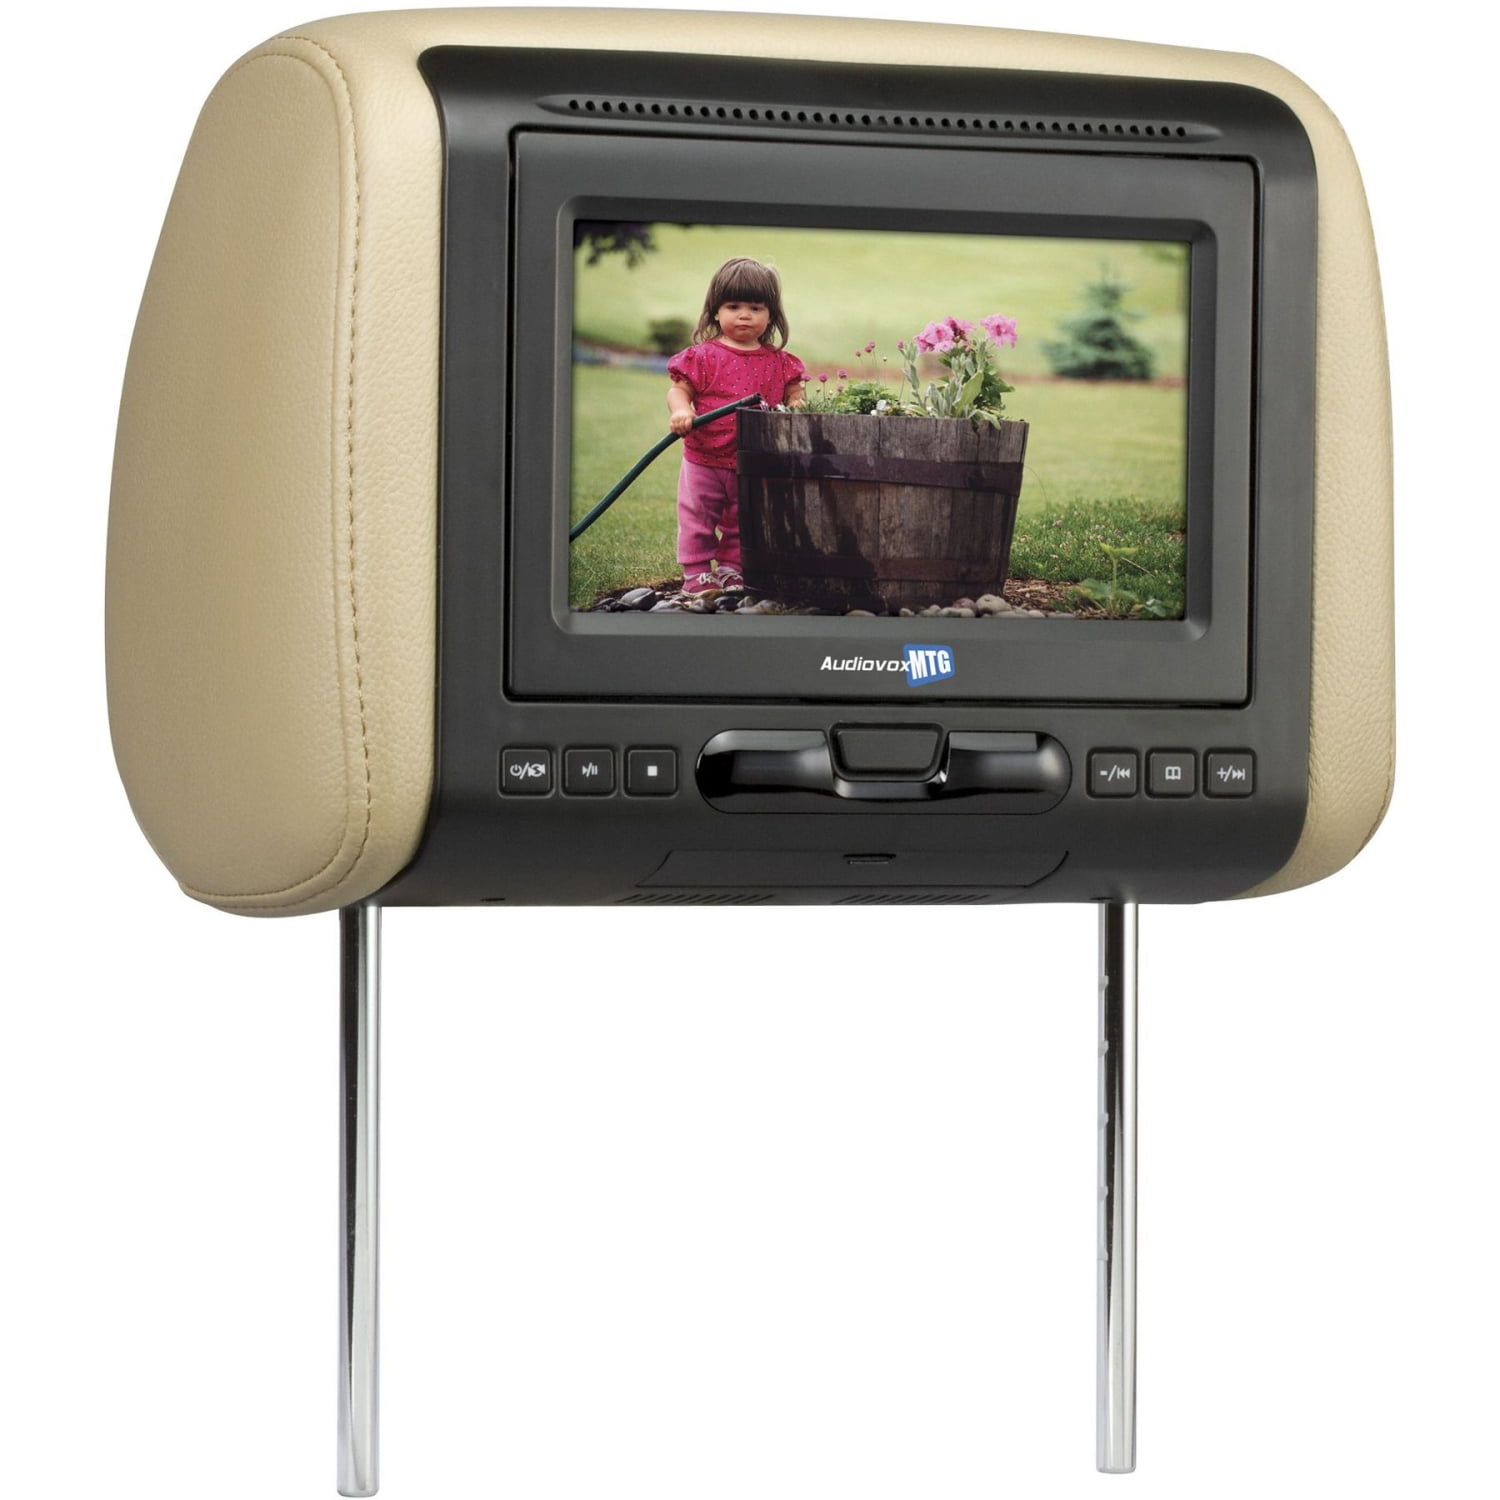 Audiovox Avxmtghr1d 7 Headrest Monitor With Built In Dvd Player